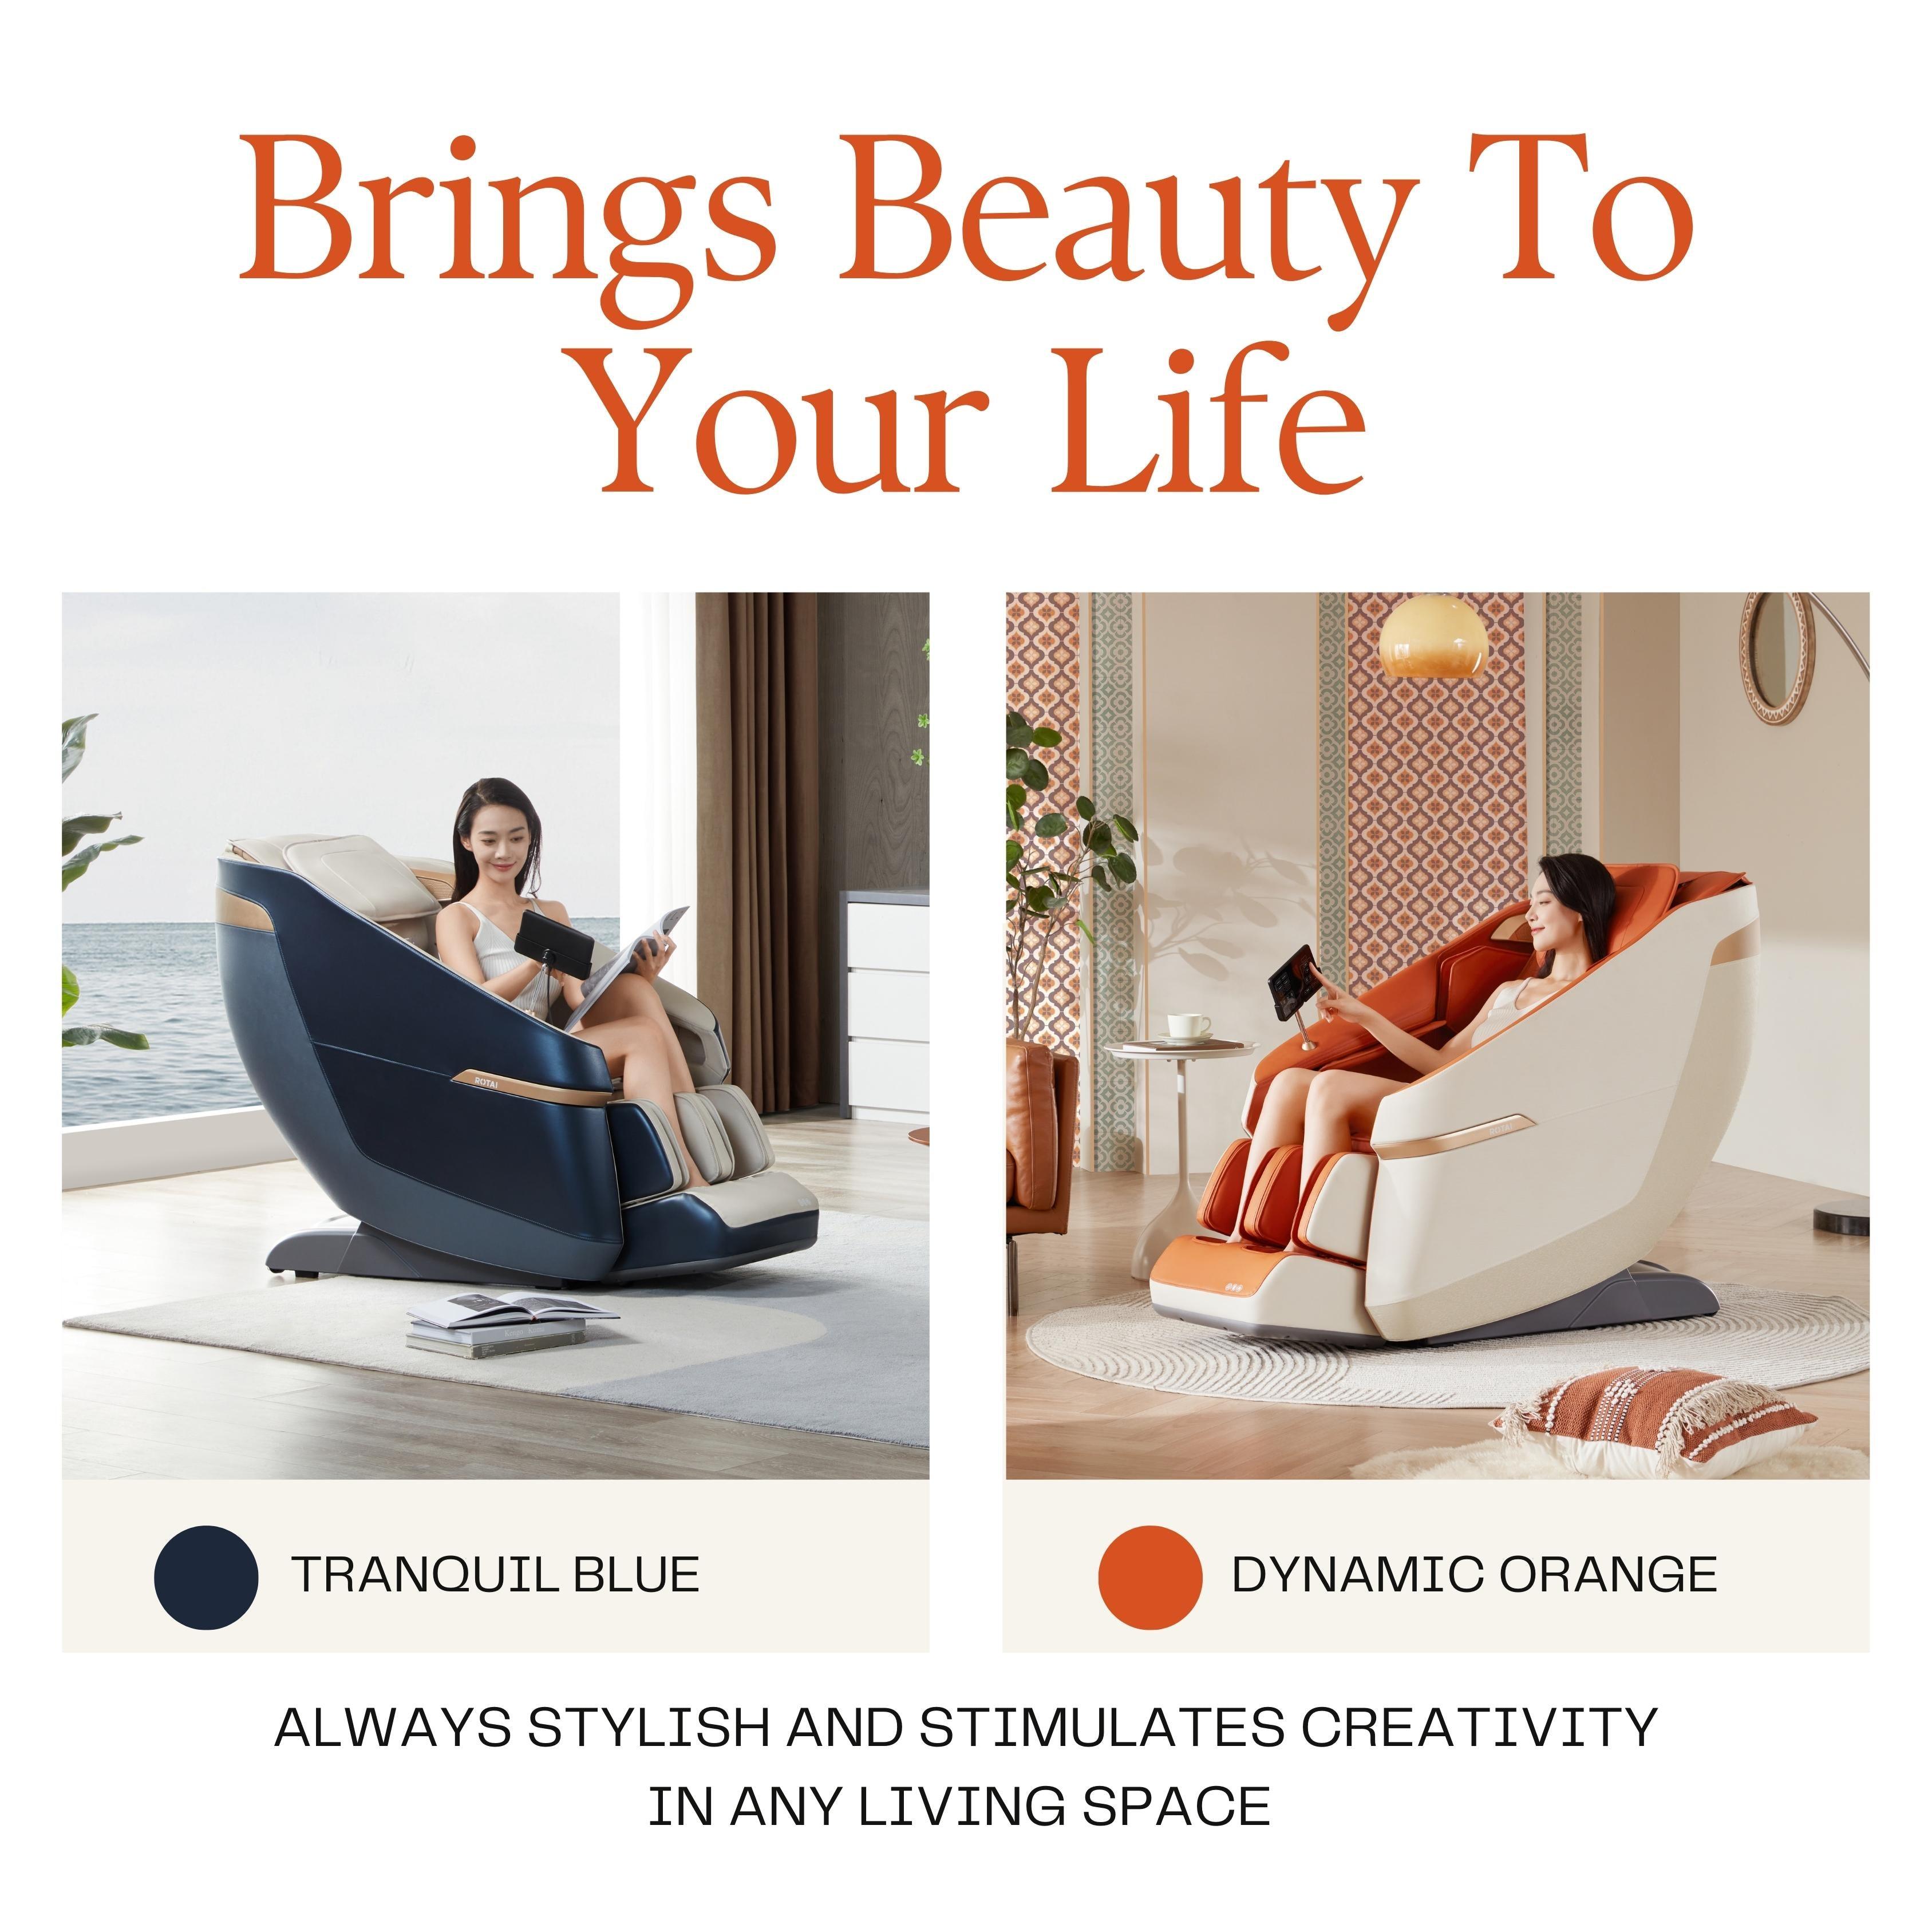 Two Jimny massage chairs - one in tranquil blue, one in dynamic orange, showcasing stylish design for ultimate relaxation. Best massage chair UAE.